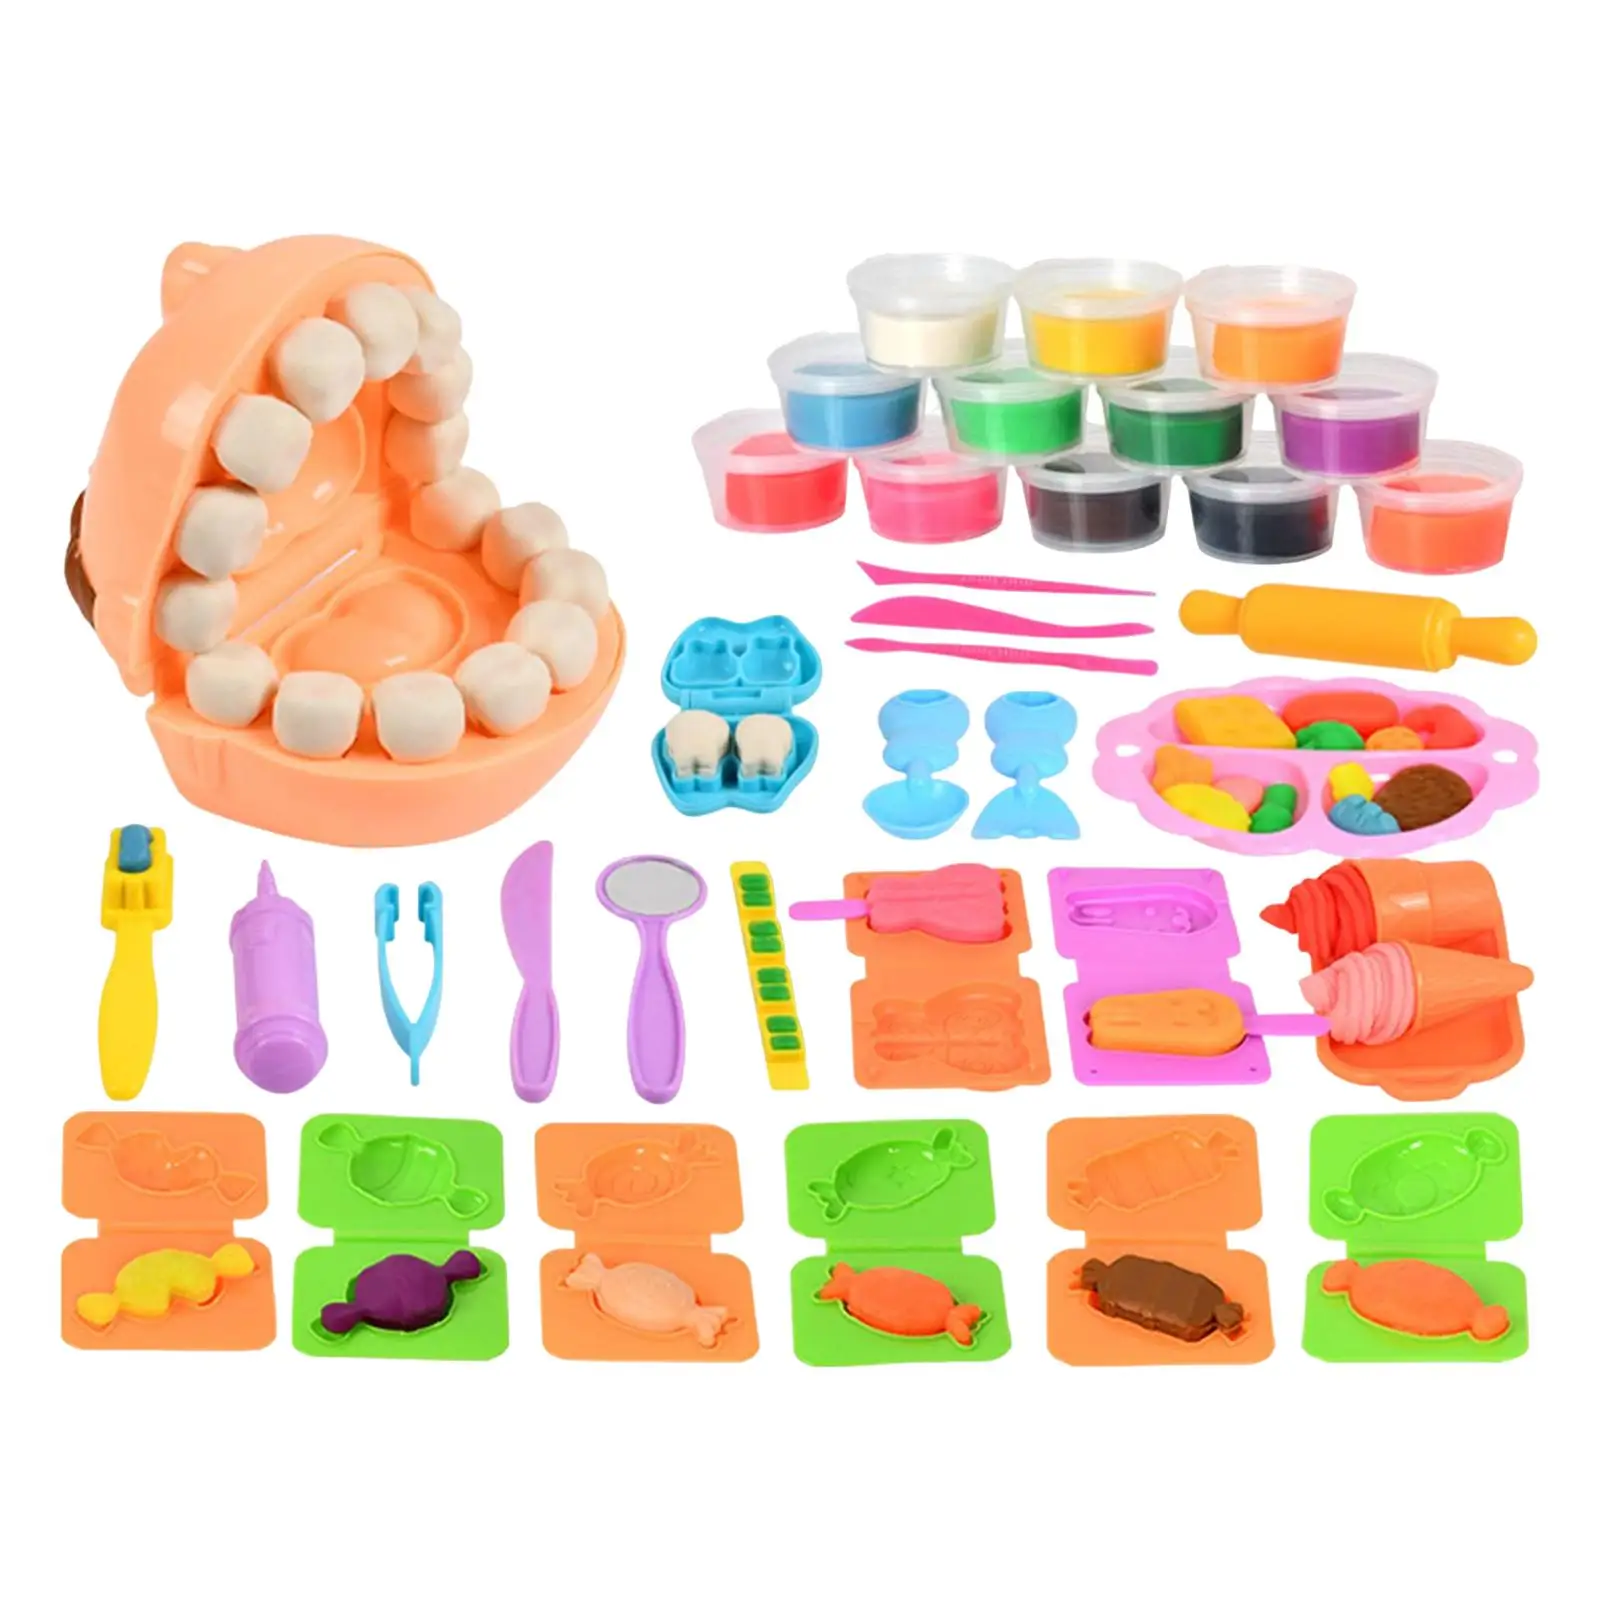 Clay Set with Accessoires DIY Models 12 colors Crafts for Gift Boys Kids